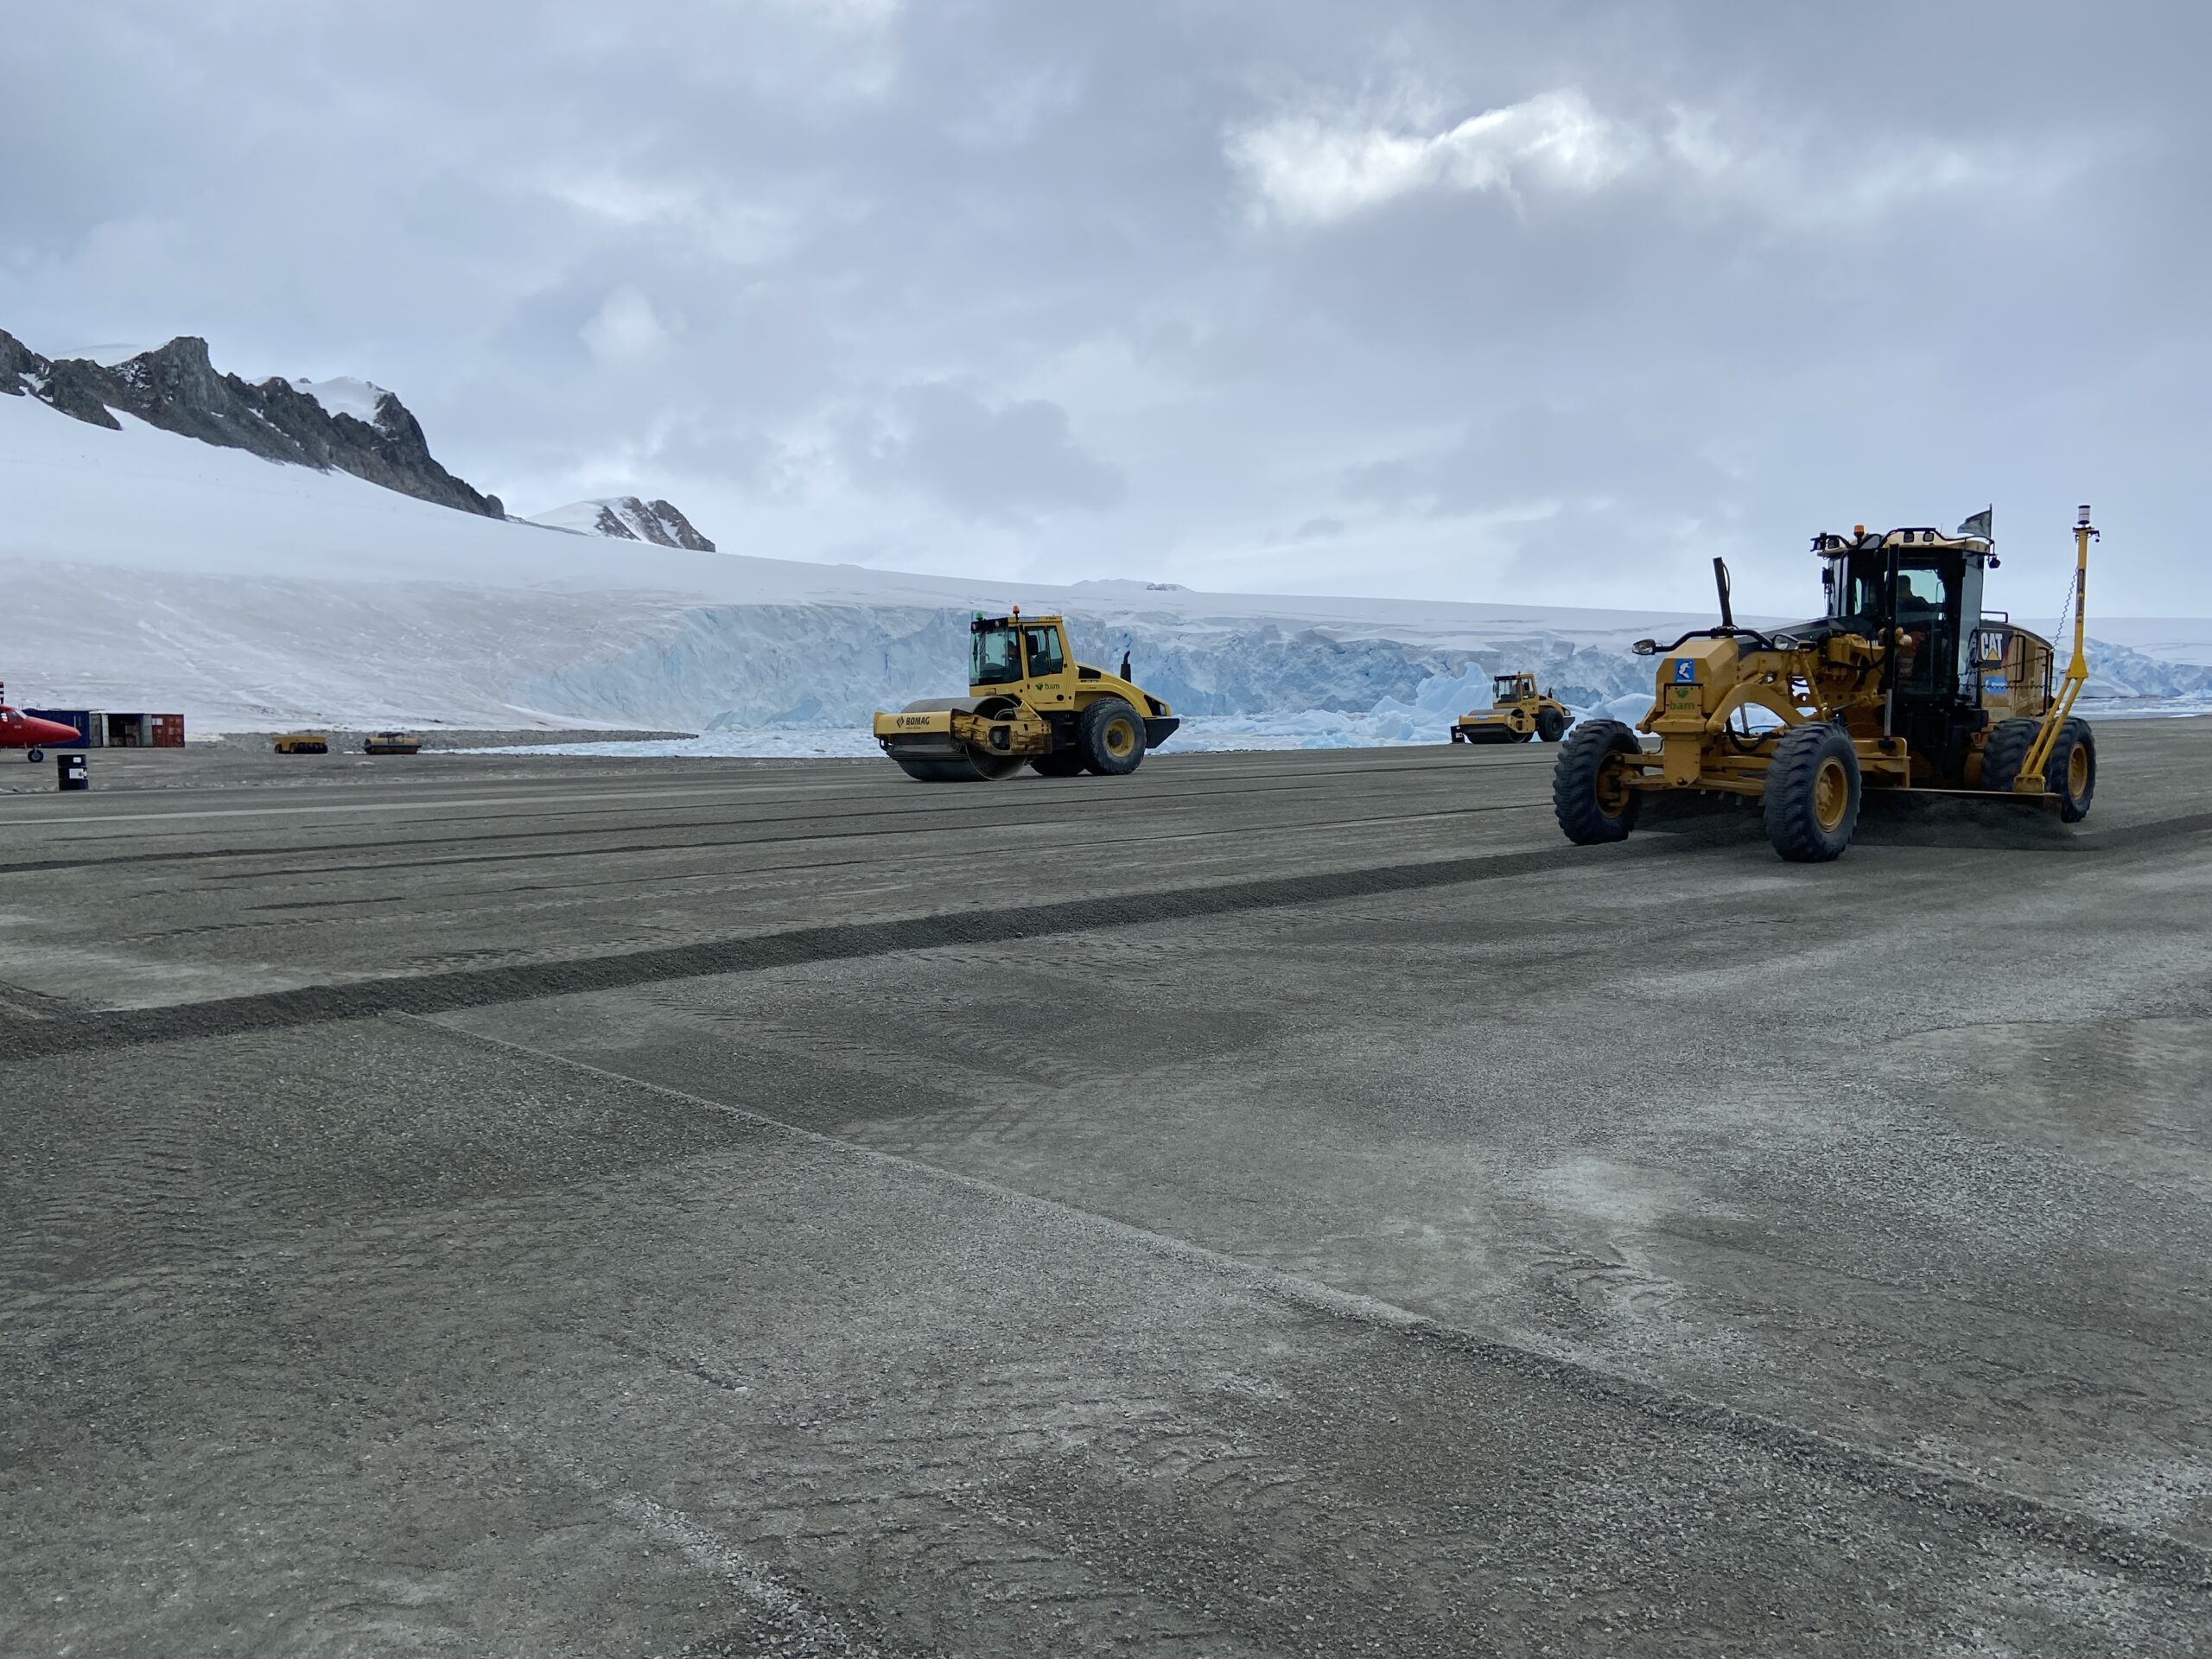 Construction vehicles on a runway surface with ice in the background.